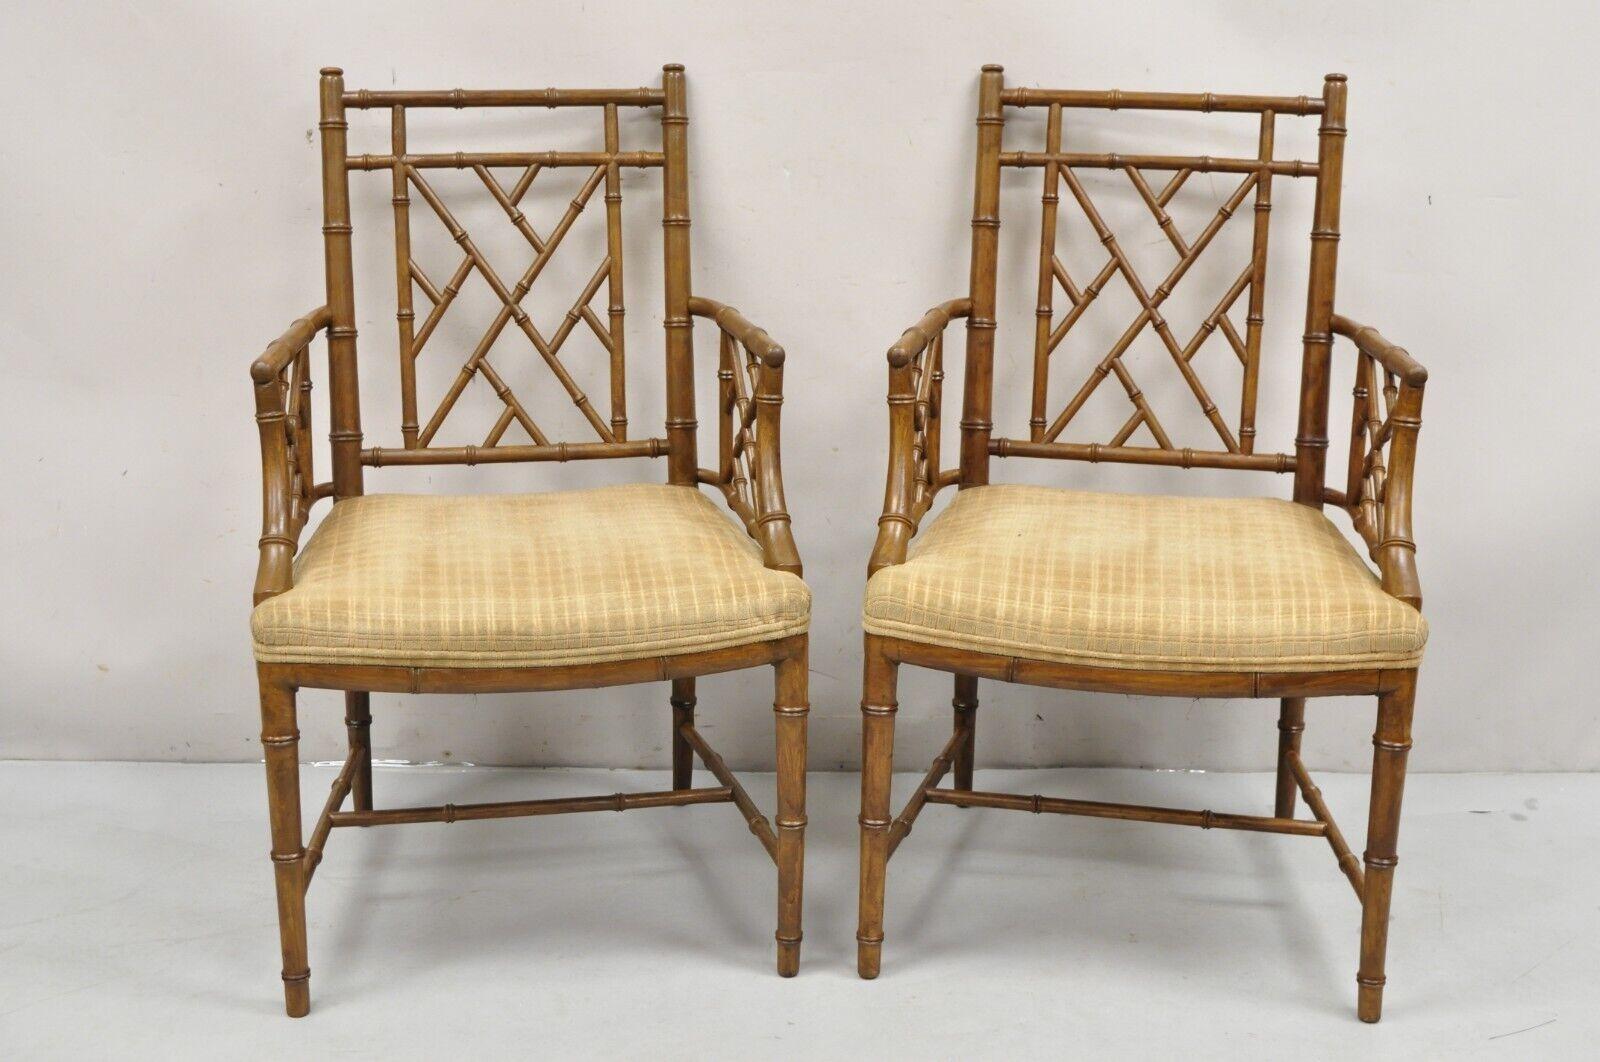 Hollywood Regency Faux Bamboo Fretwork Chinese Chippendale Arm Chairs - a Pair. Circa Mid to Late 20th Century. Measurements: 37.5 H x 22